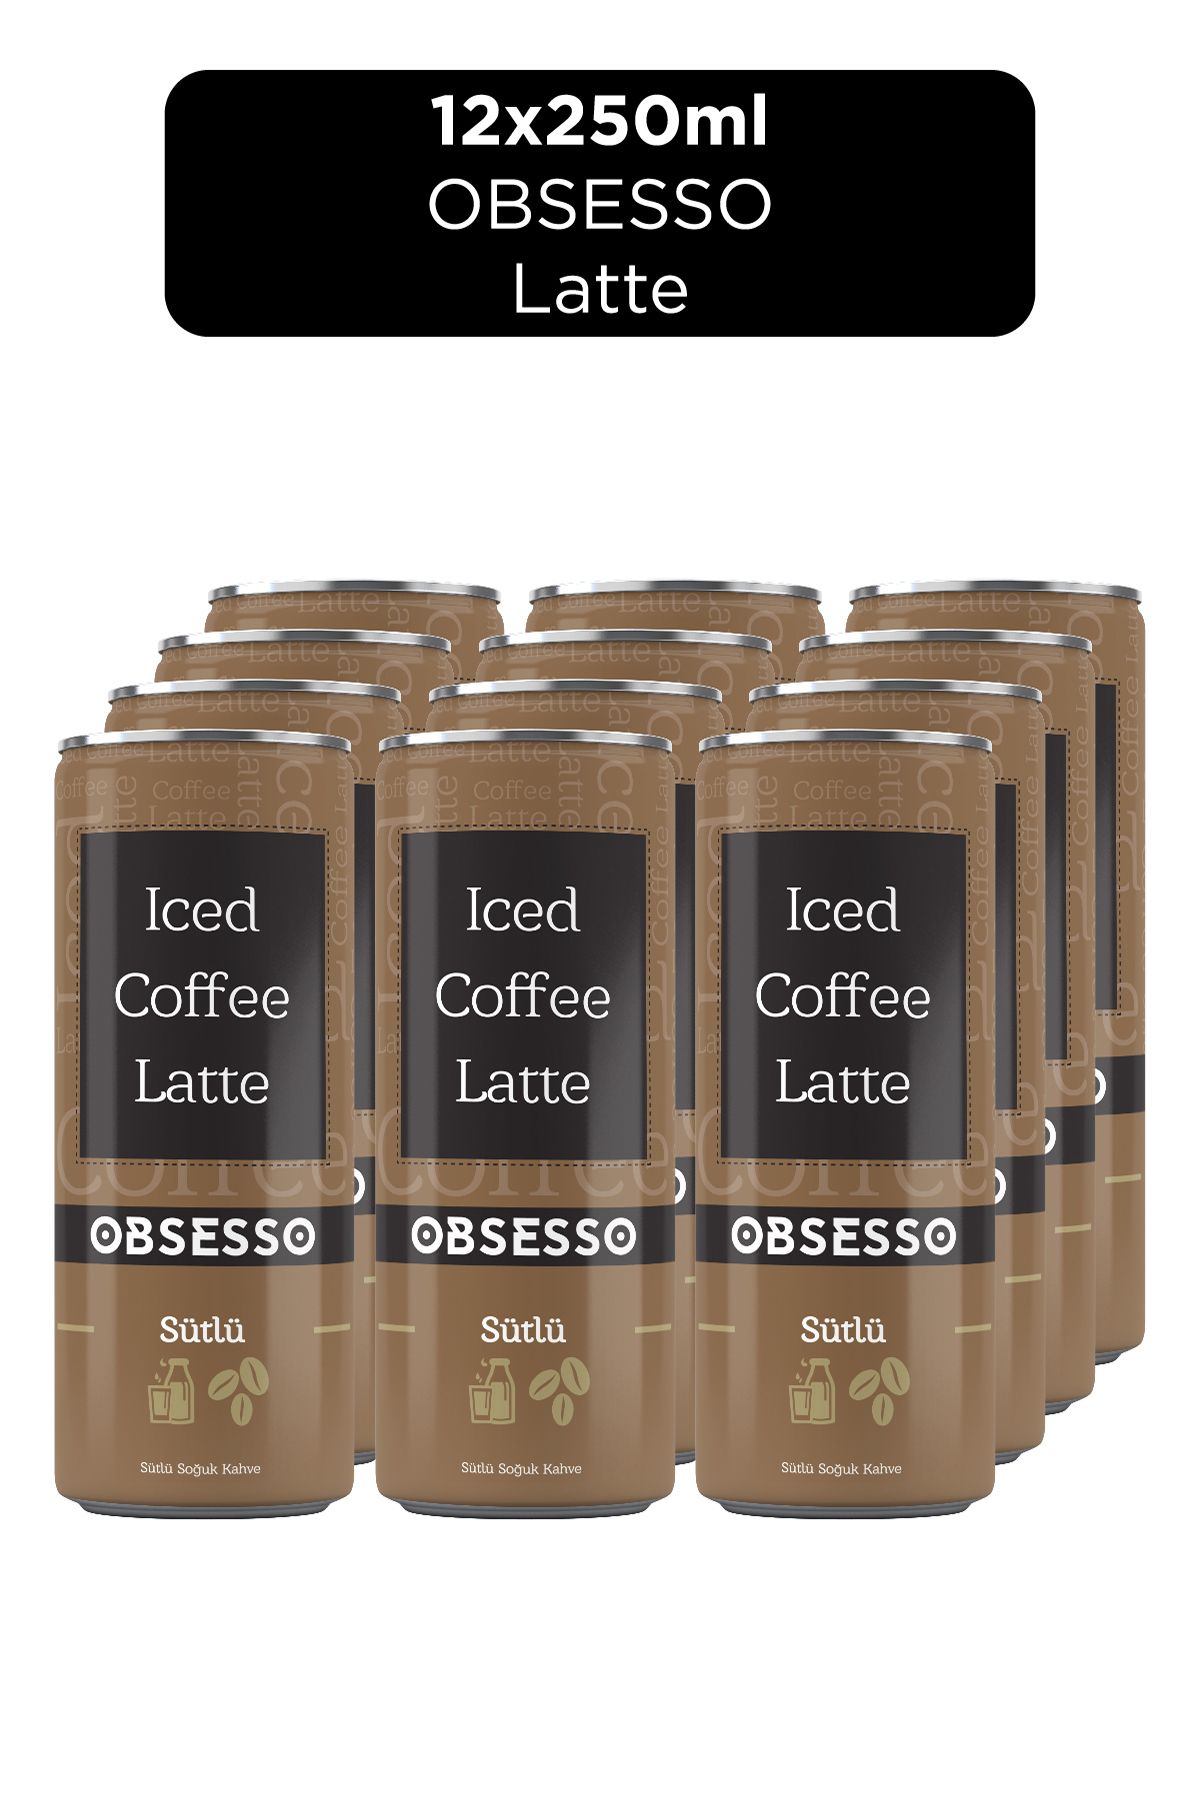 OBSESSO Iced Coffee Latte 250ml X